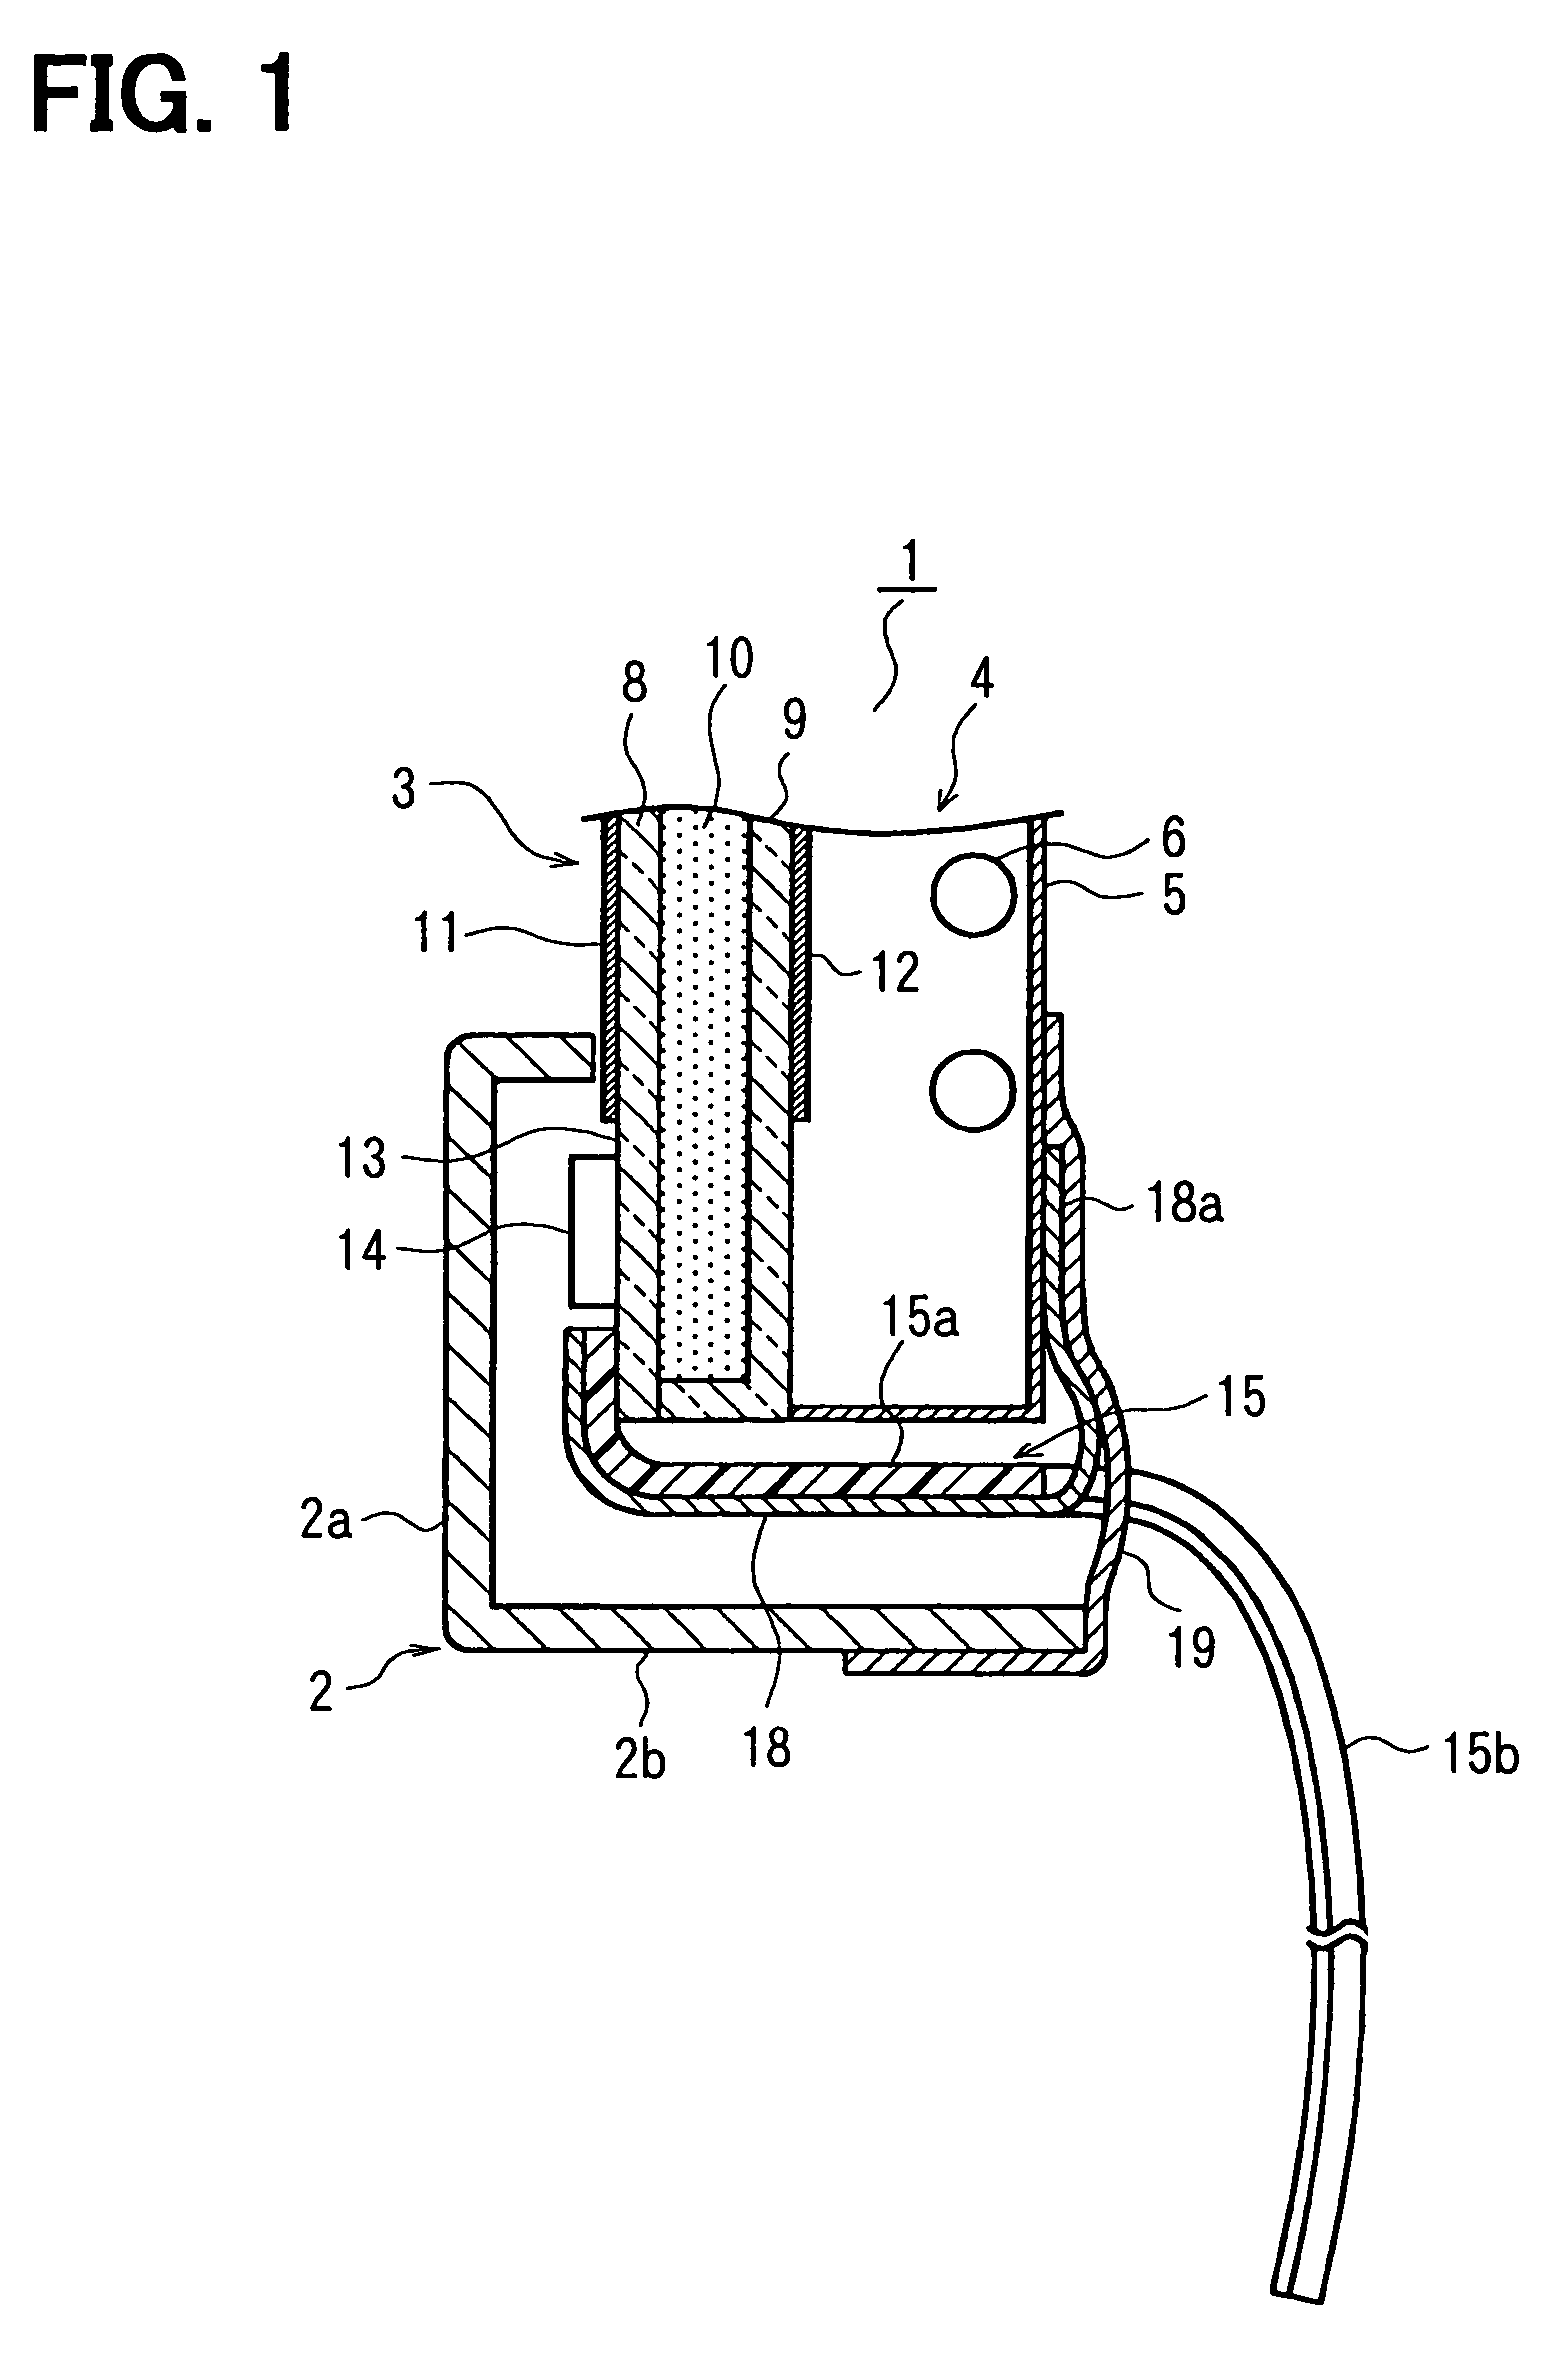 Display panel having noise shielding structure